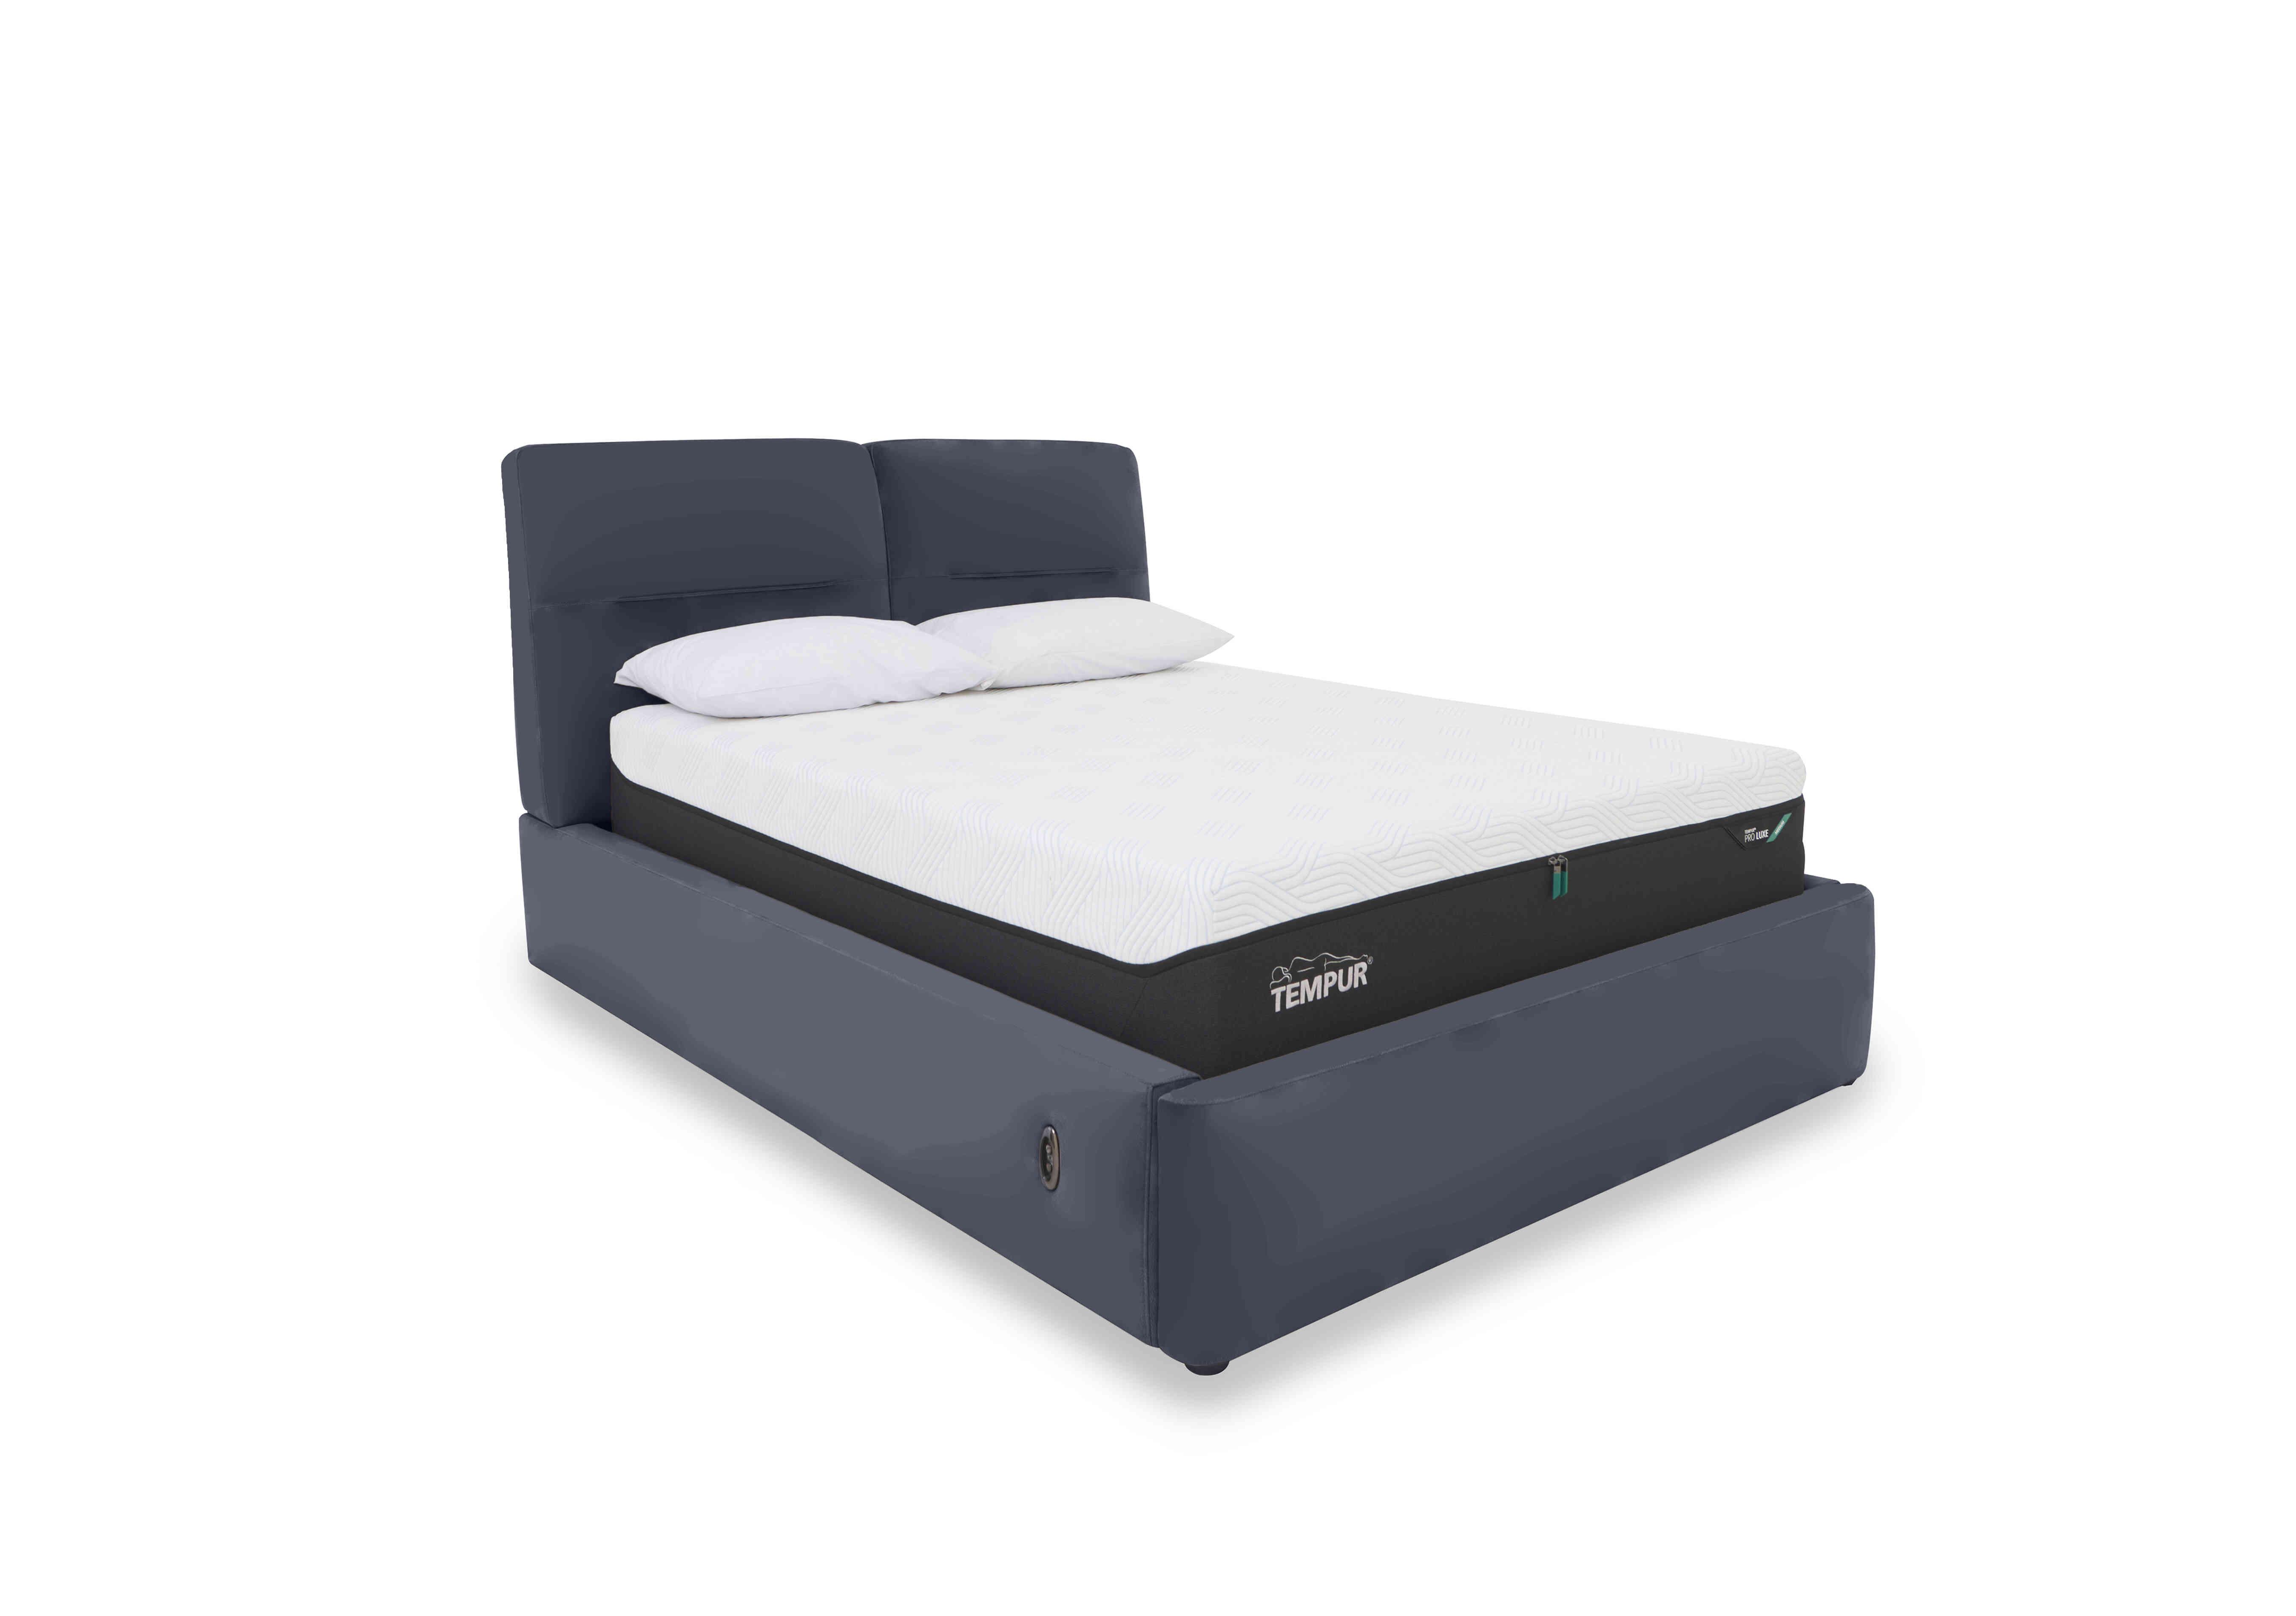 Stark Leather Electric Ottoman Bed Frame in Bv-313e Ocean Blue on Furniture Village